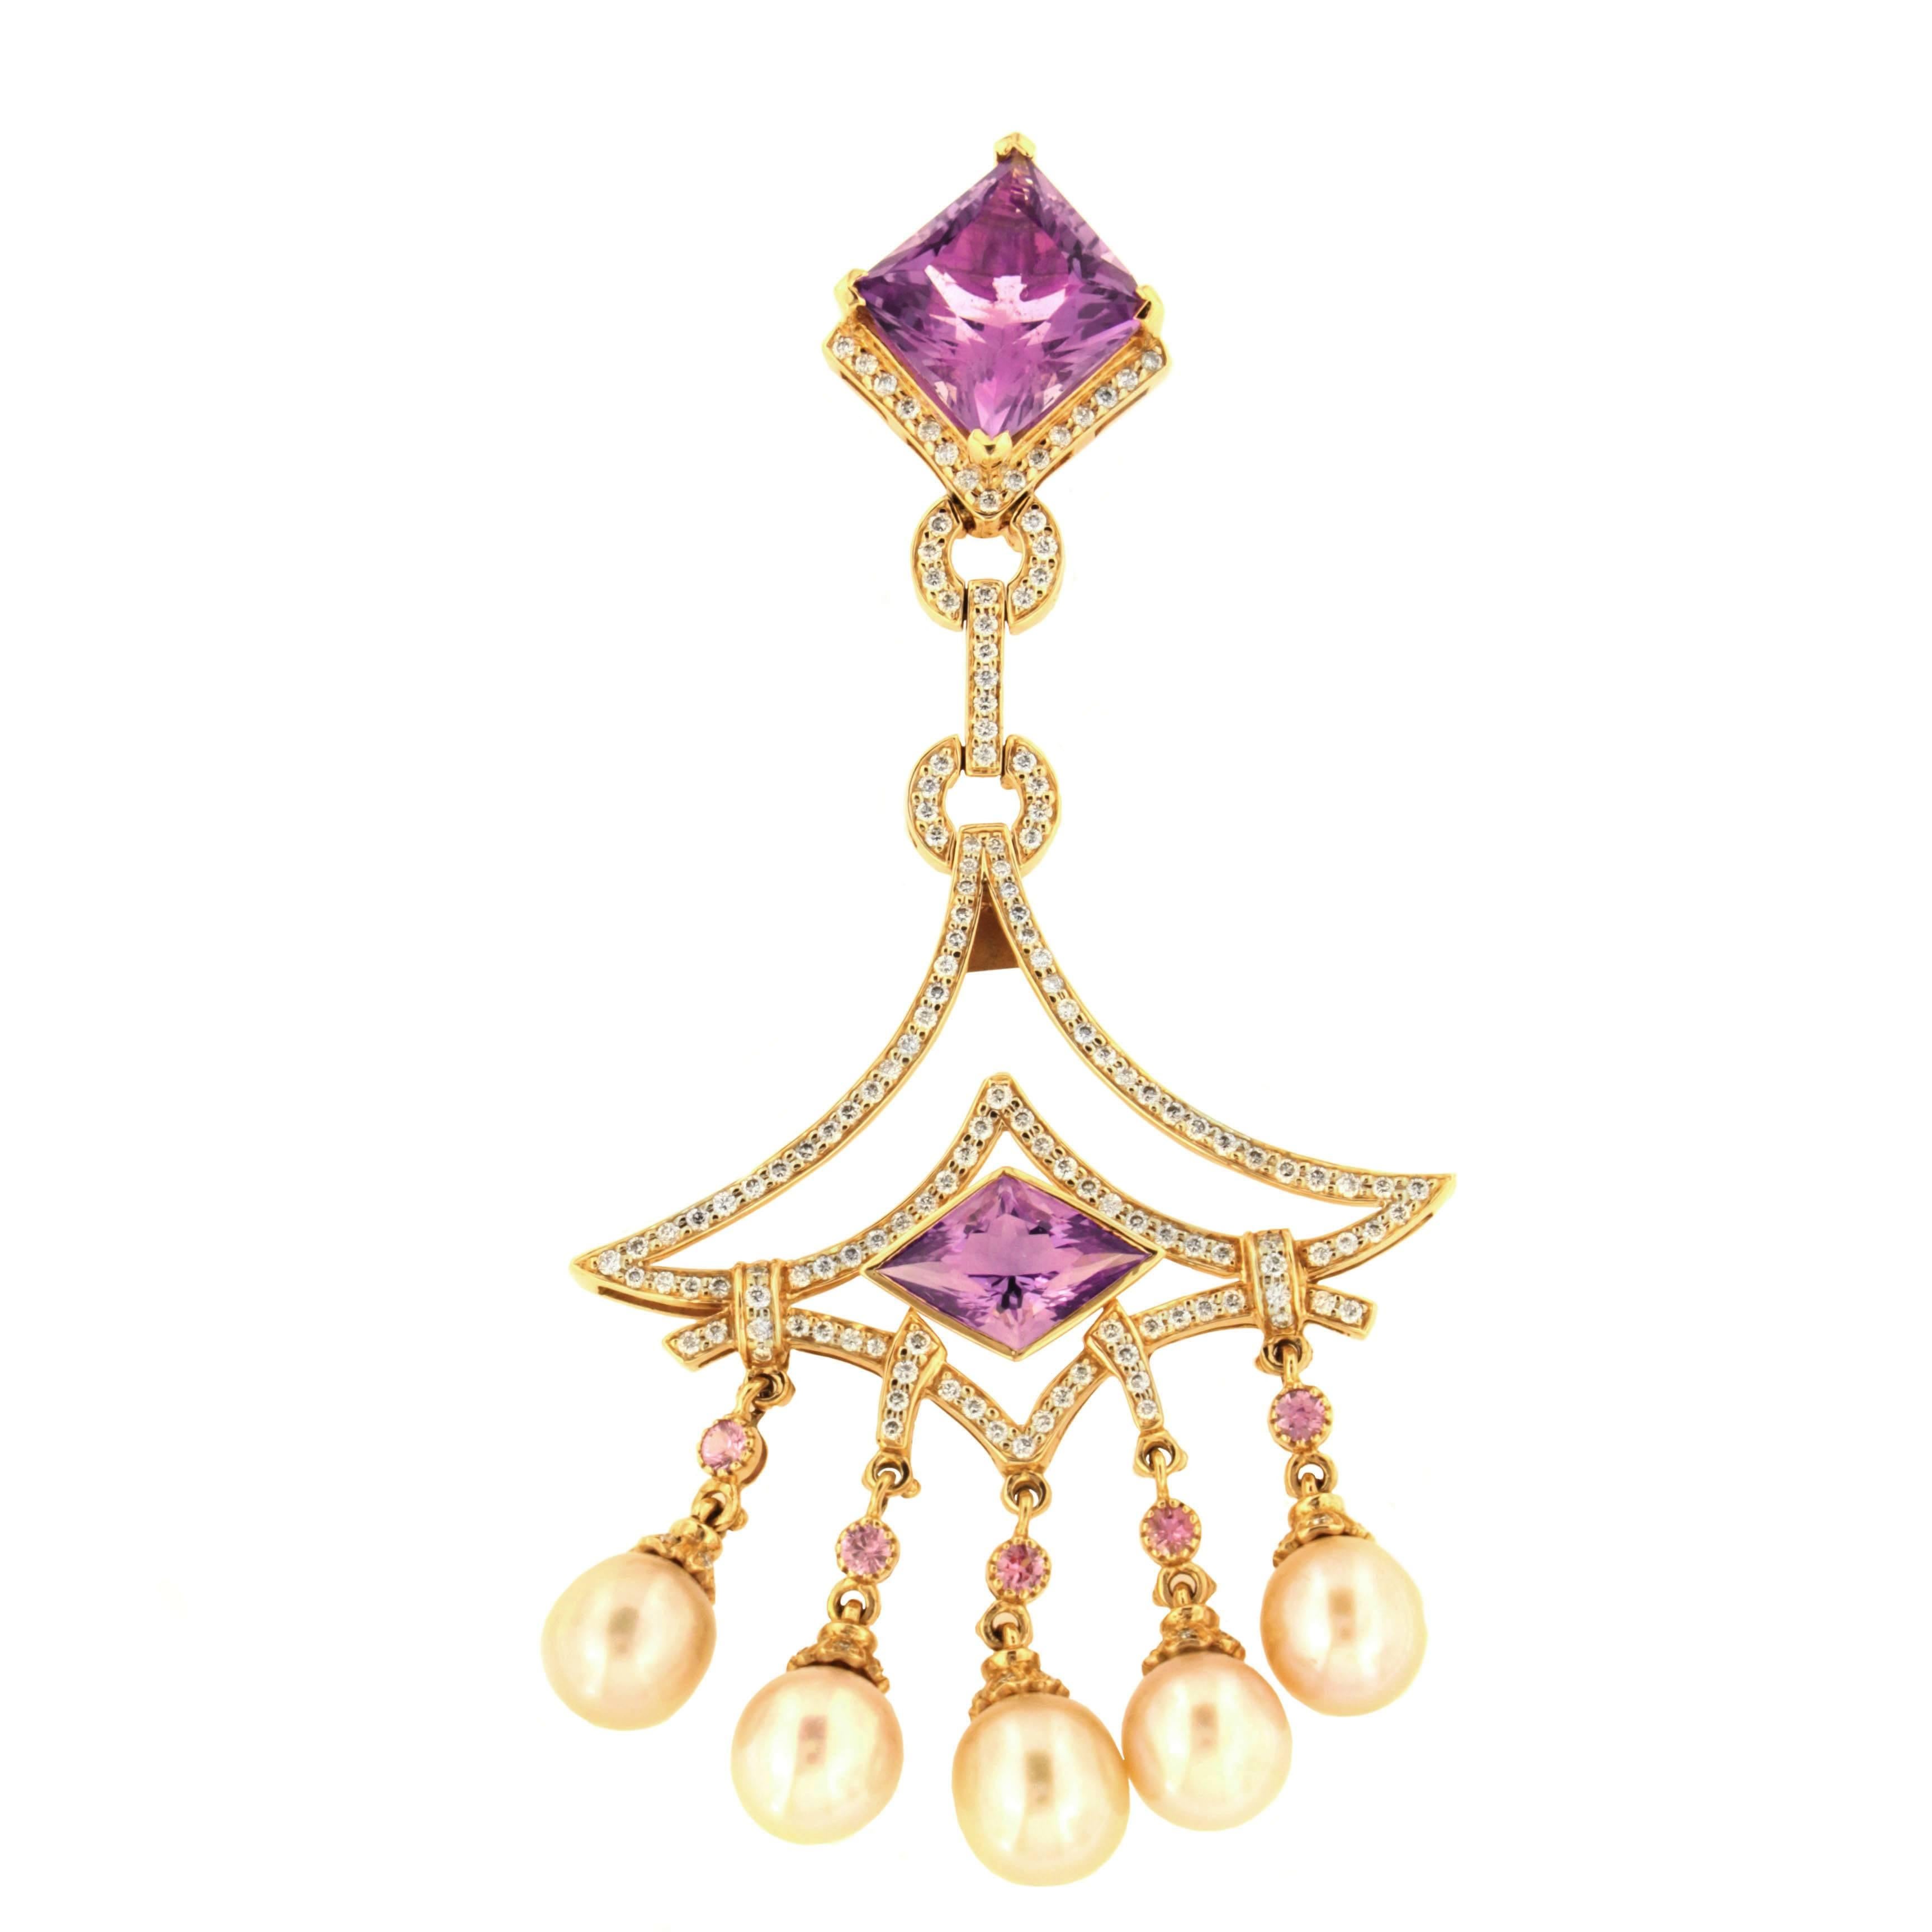 Traditionally considered the ultimate symbol of elegance, Zorab's Pink Pearl (10 qty) statement Chandelier earrings are soft and romantic. The regal design is set with Pink Sapphire (1.12 Carats), Amethyst Quartz (26.12 Carats) and White Diamond